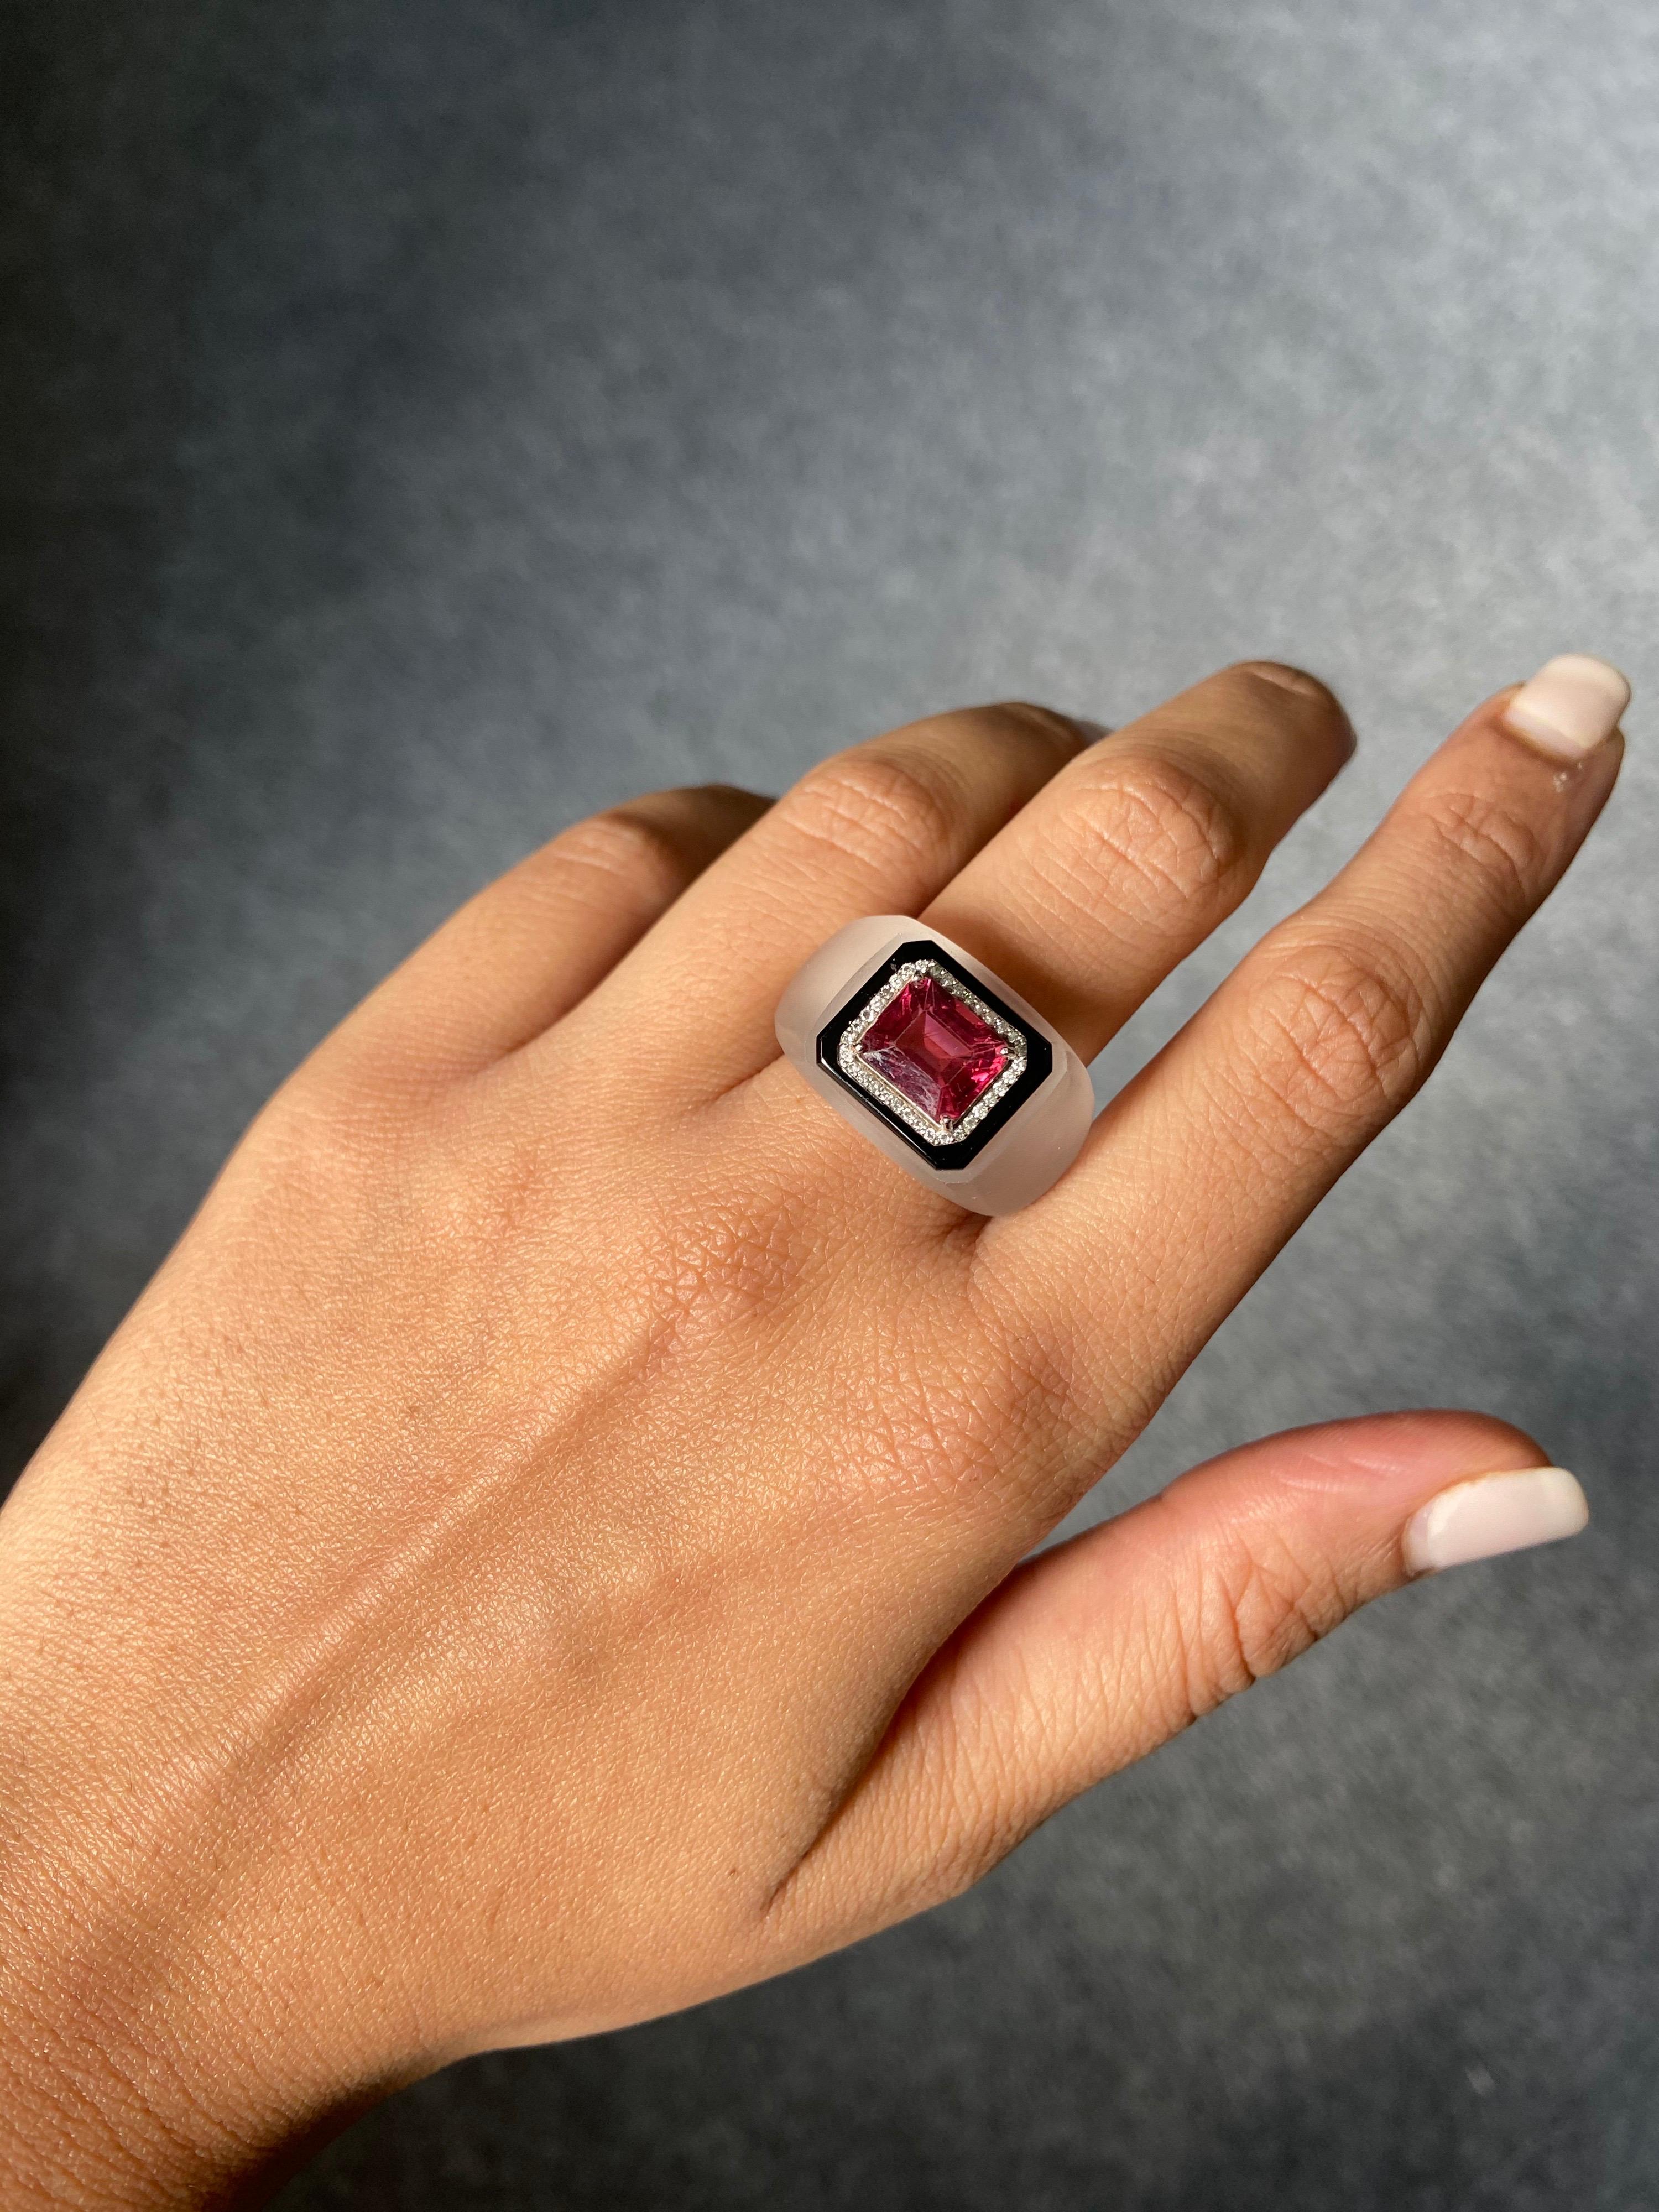 One of a kind art-deco vibe emerald cut Tourmaline ring, set in 18K white gold with Diamonds, black onyx and Rock Crystal. The ring is currently sized at US 7 - customization is available. 
Please feel free to message us if you have any queries.